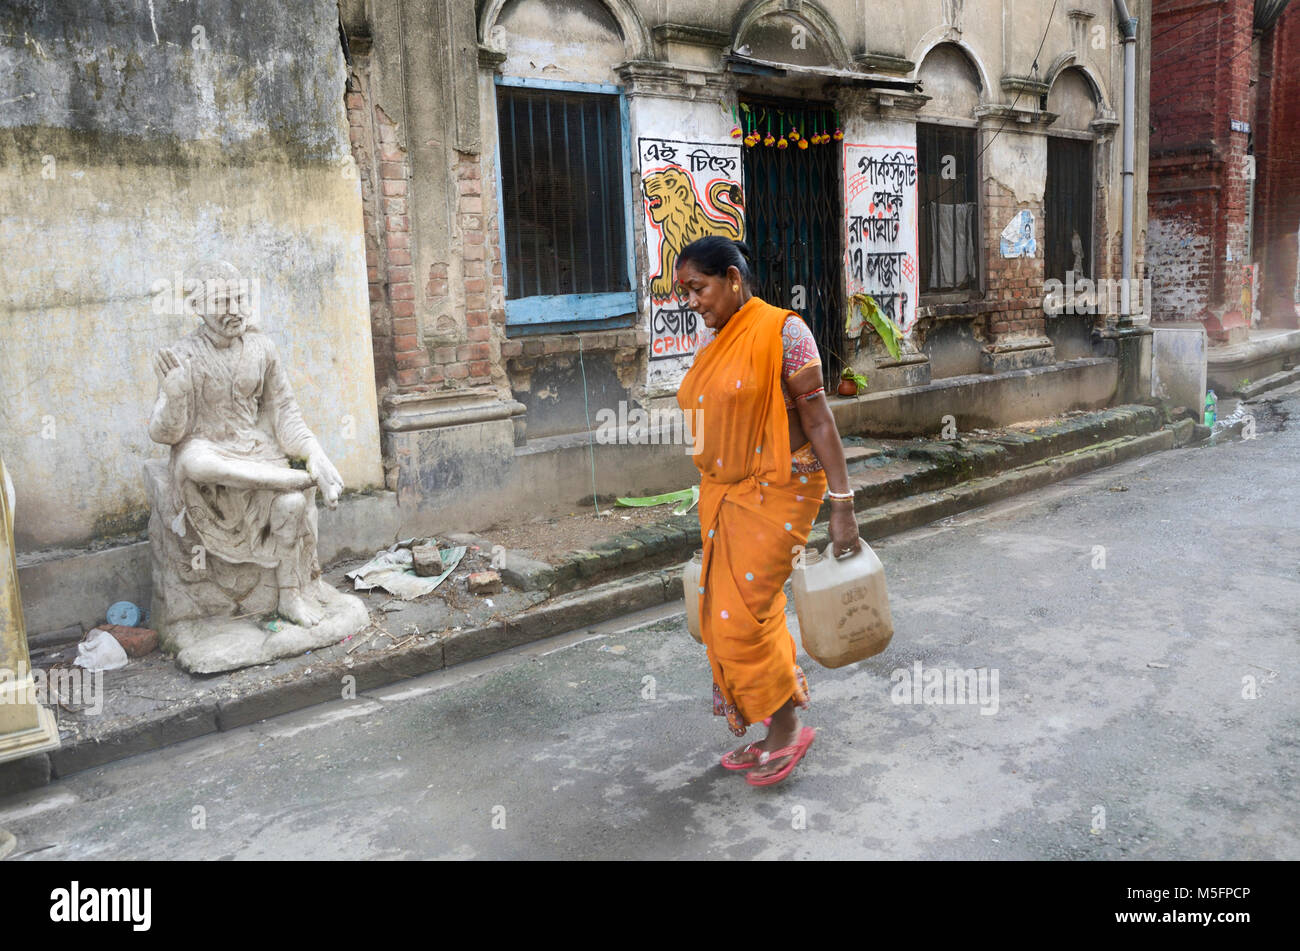 Sai Baba idol, woman carrying water in plastic cans, Kolkata, West Bengal, India, Asia Stock Photo